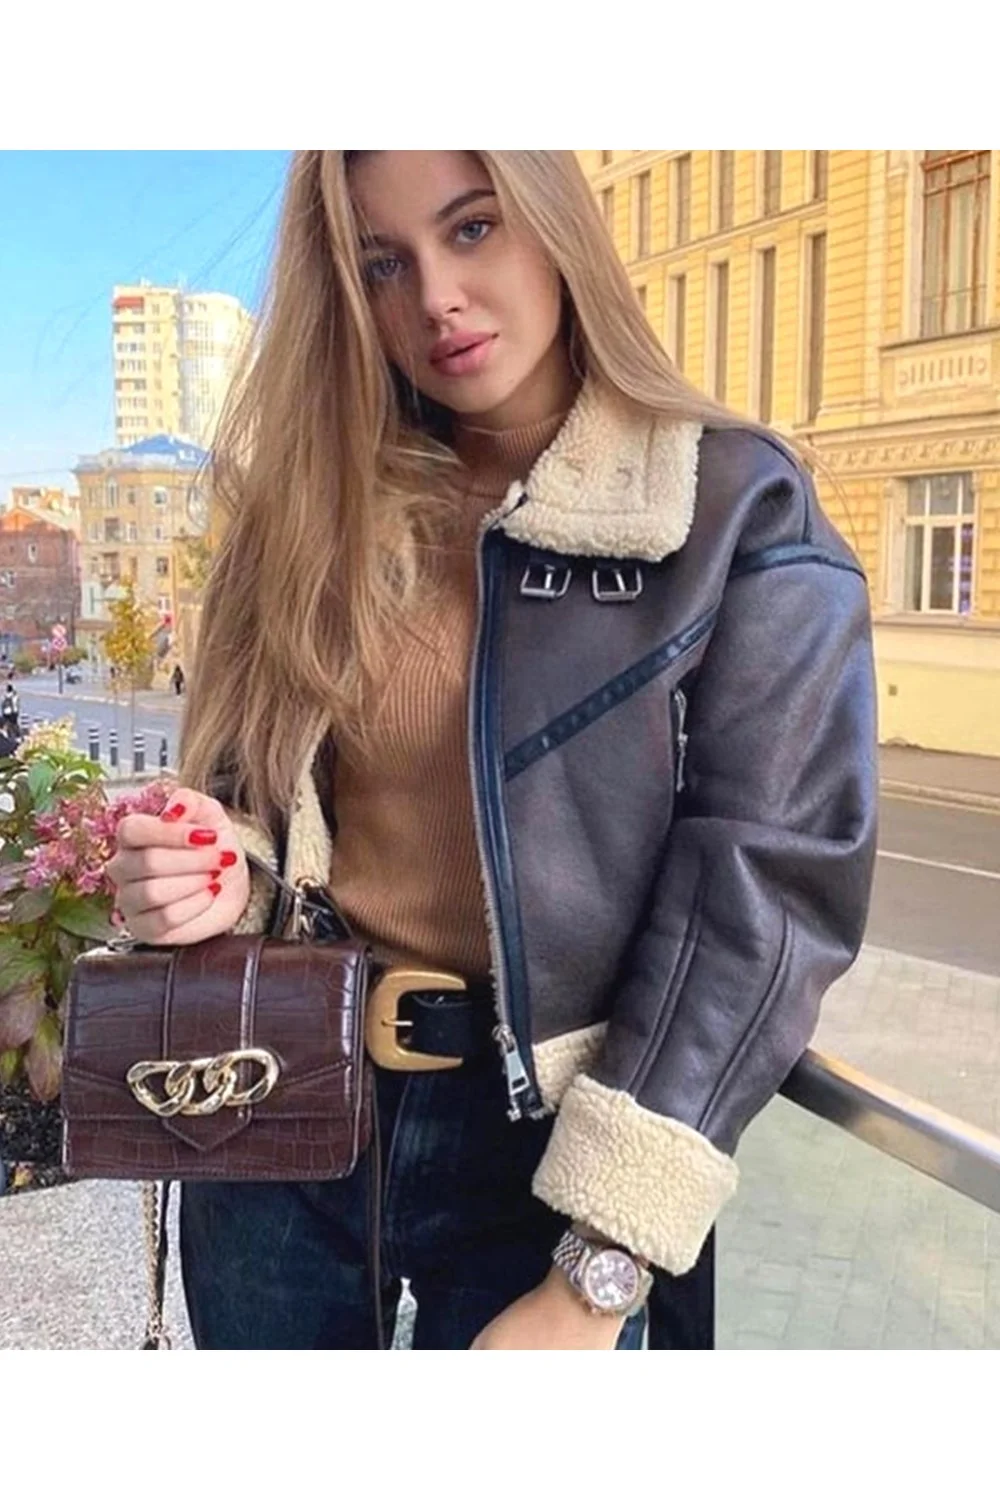 Toloer New Fashion Suede Teddy Brown Woman Jacket Vintage Patchwork PU With Zipper Winter Coat Women Female Outwear Tops 1109-0